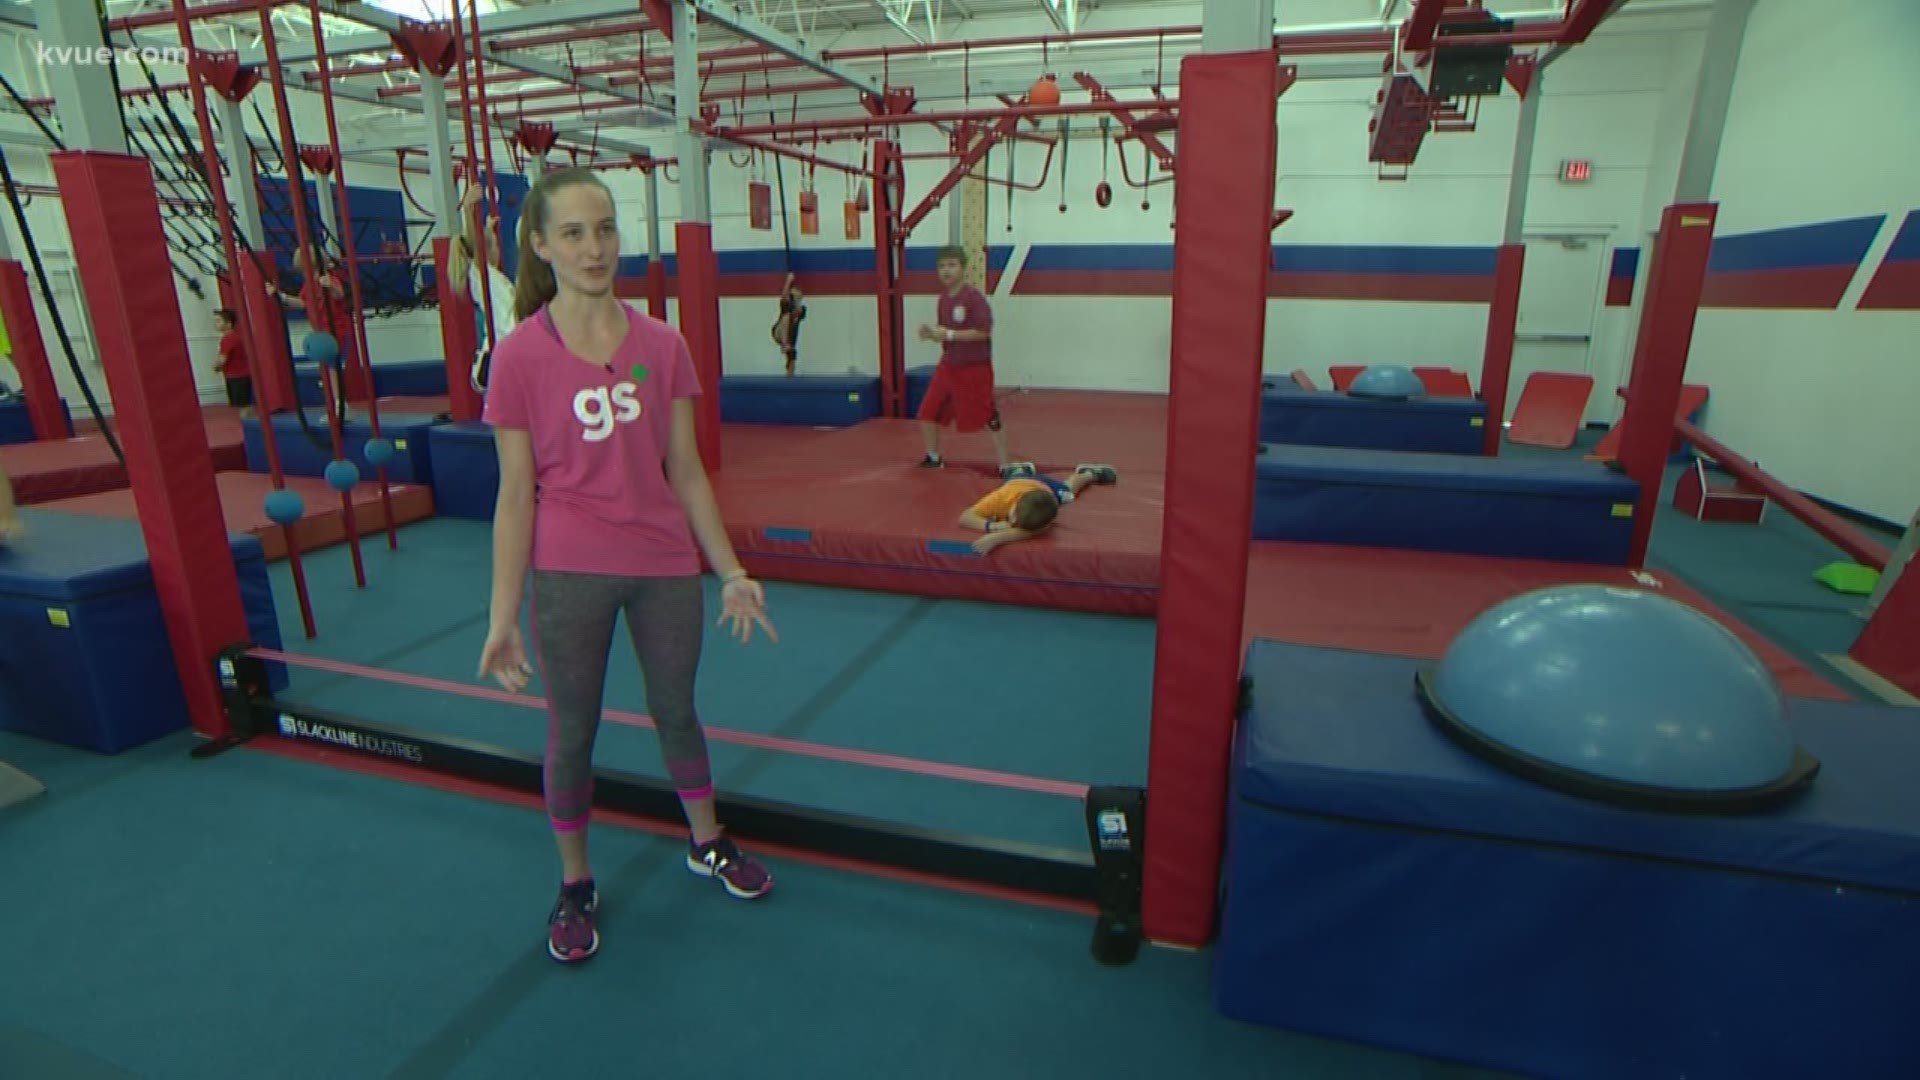 One Austin Girl Scout is changing perceptions by overcoming obstacles and qualifying for the Ultimate Ninja Athletic Association World Championships.